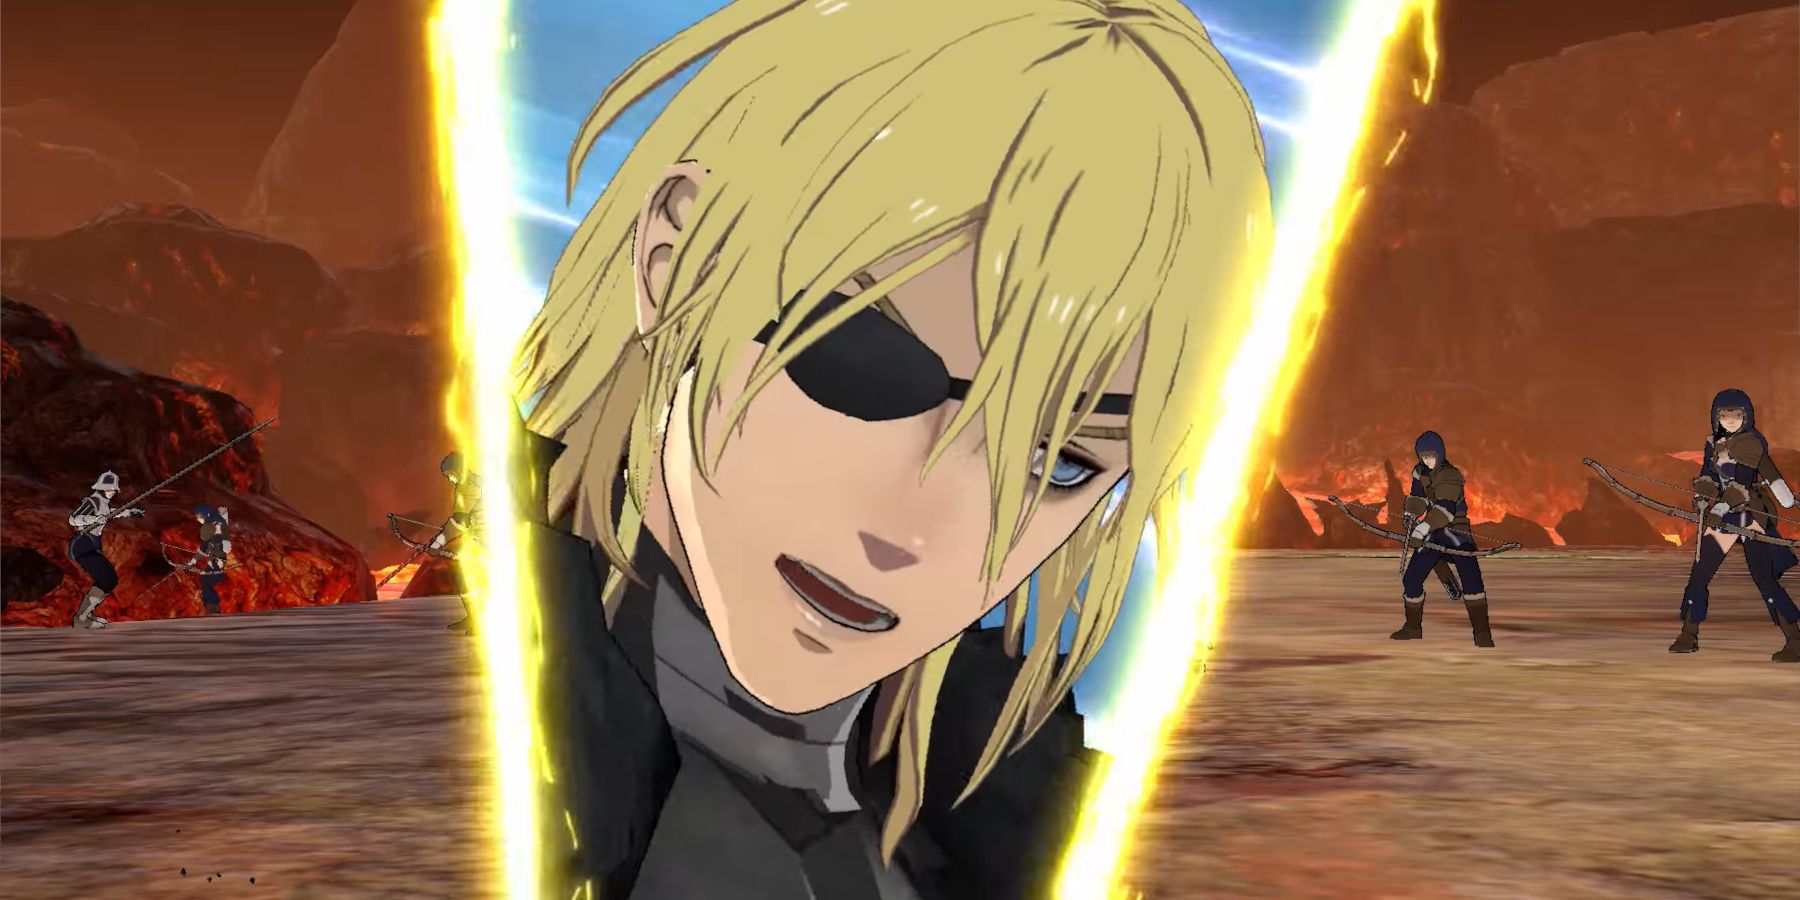 Dimitri's critical hit animation in Fire Emblem: Three Houses.